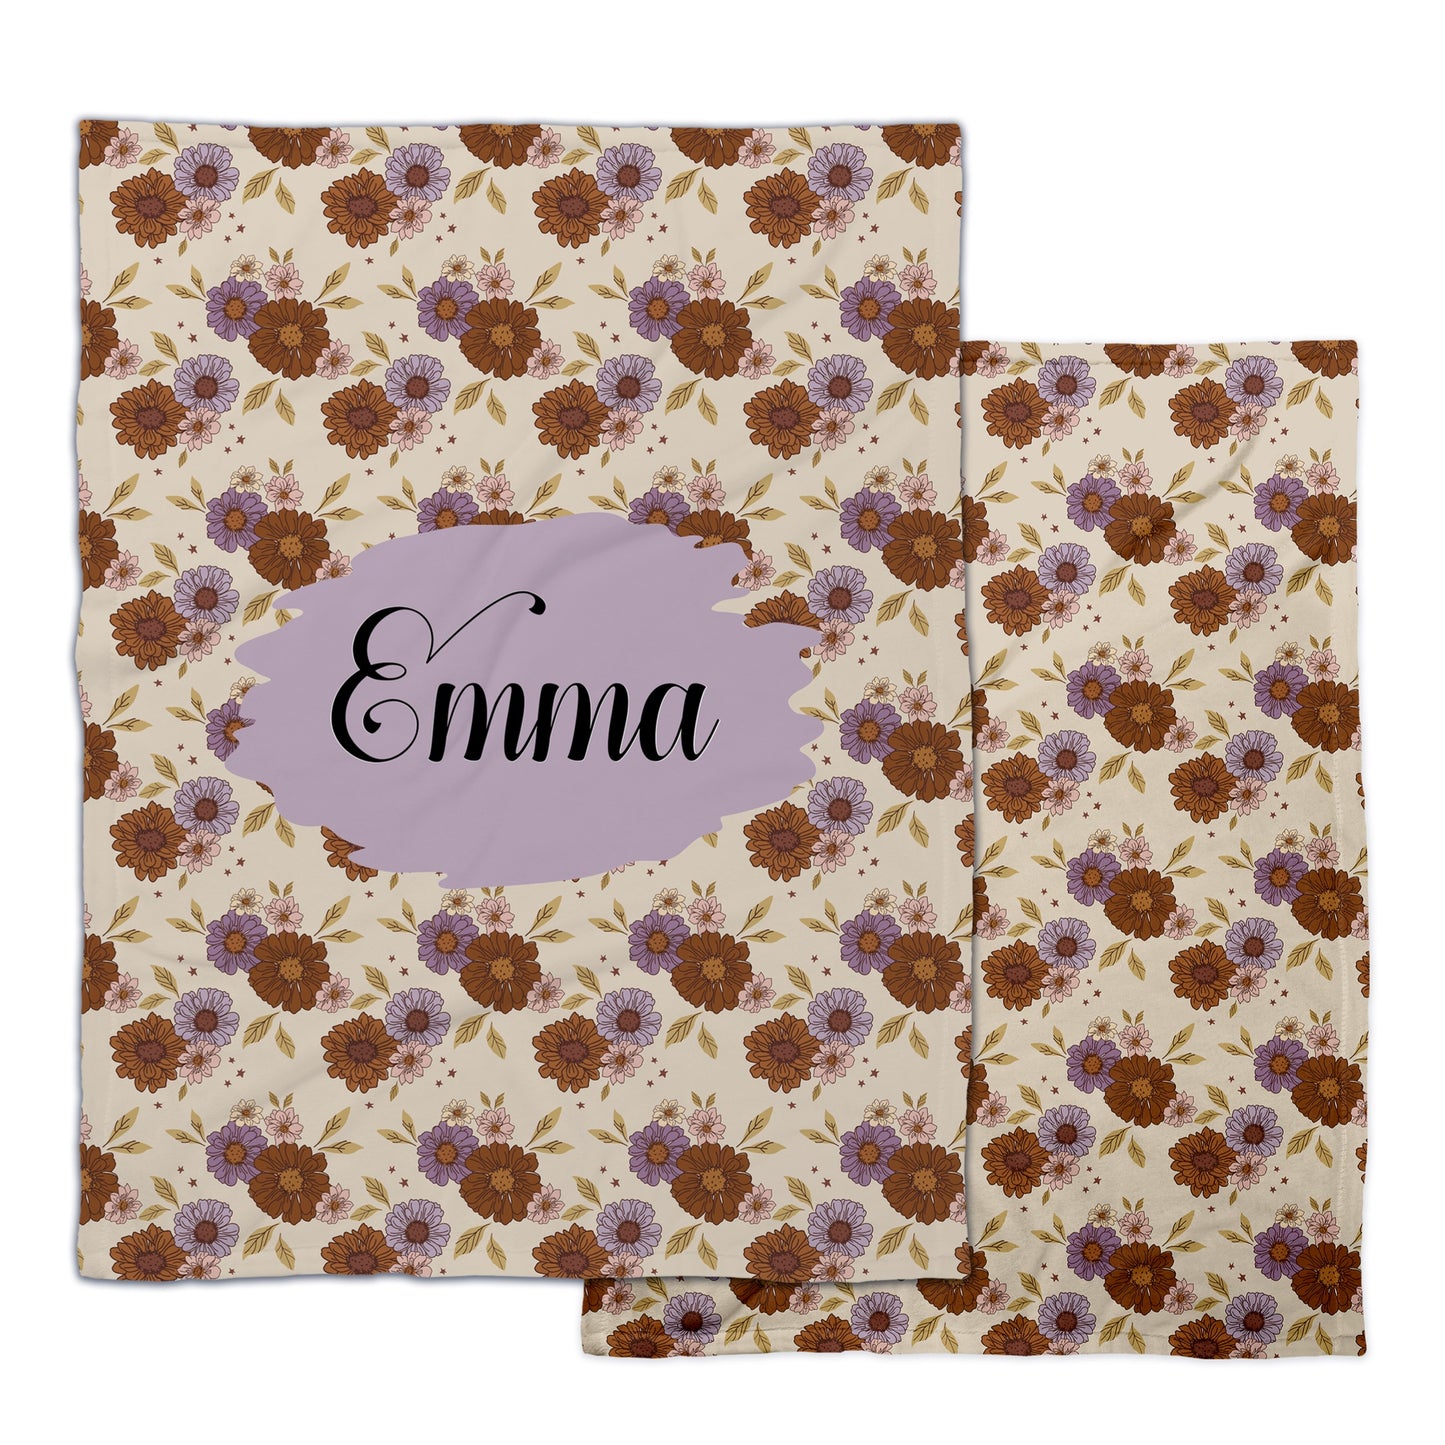 Juniper Row floral patterned fleece blankets with customizable name text.